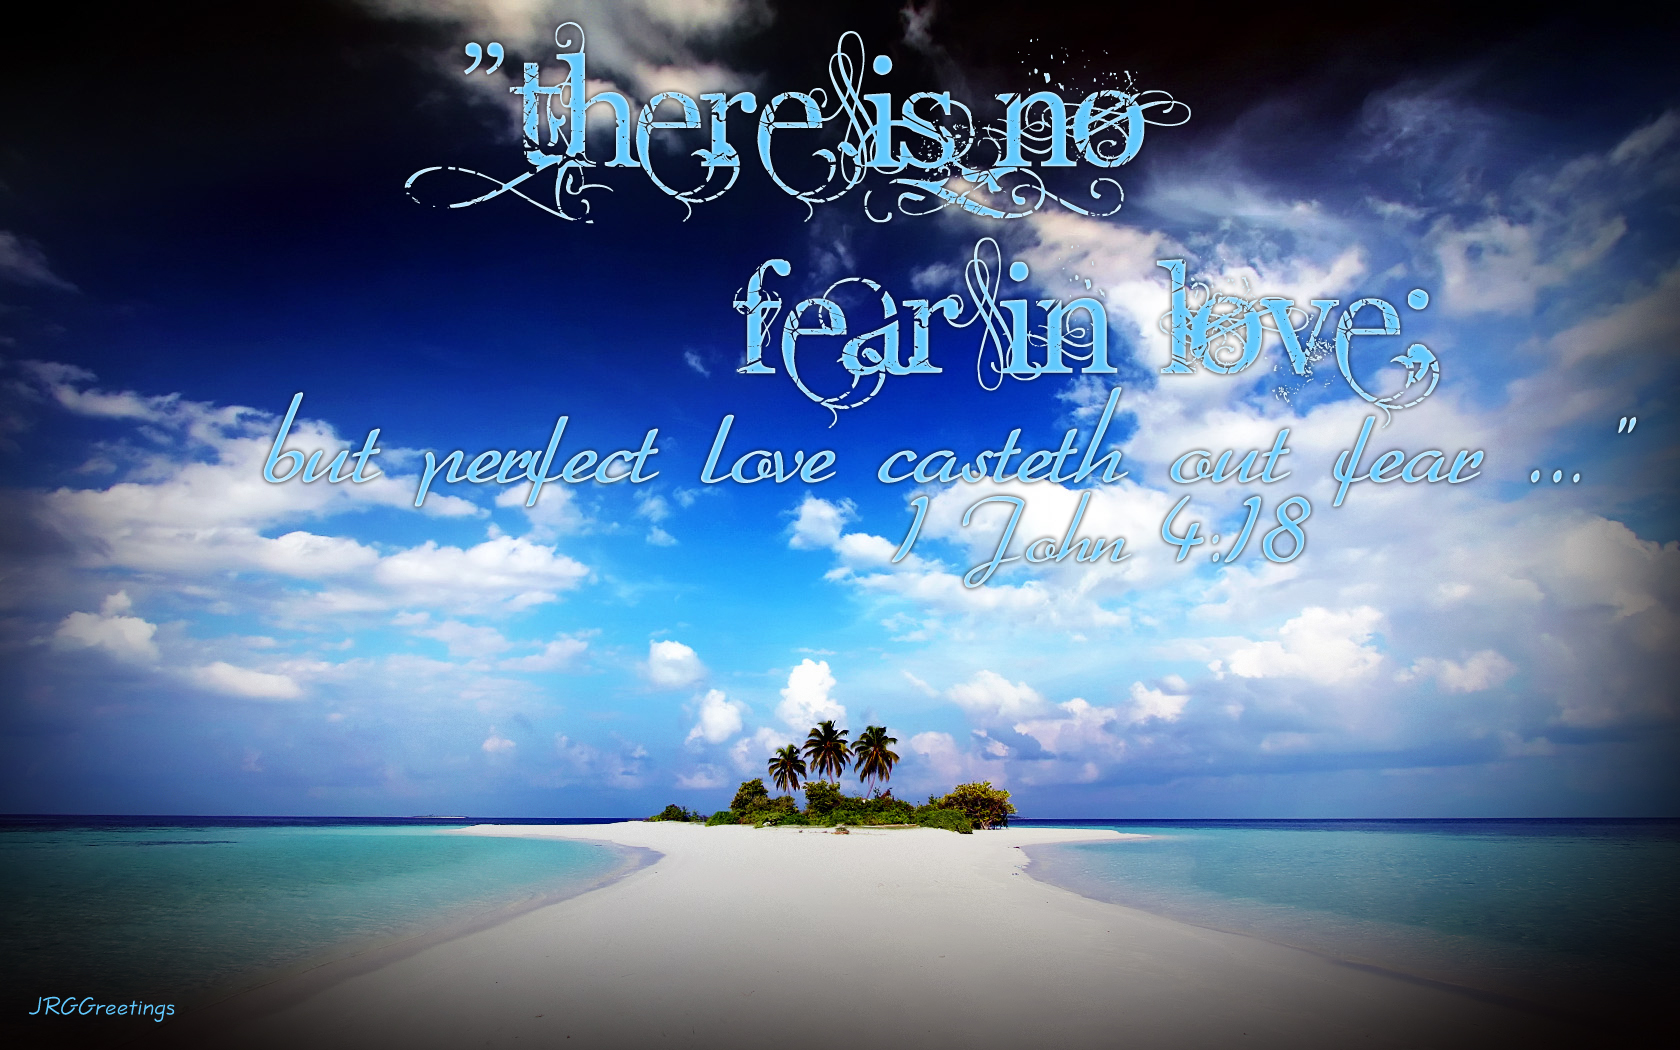  Love Drives Out Fear Wallpaper   Christian Wallpapers and Backgrounds